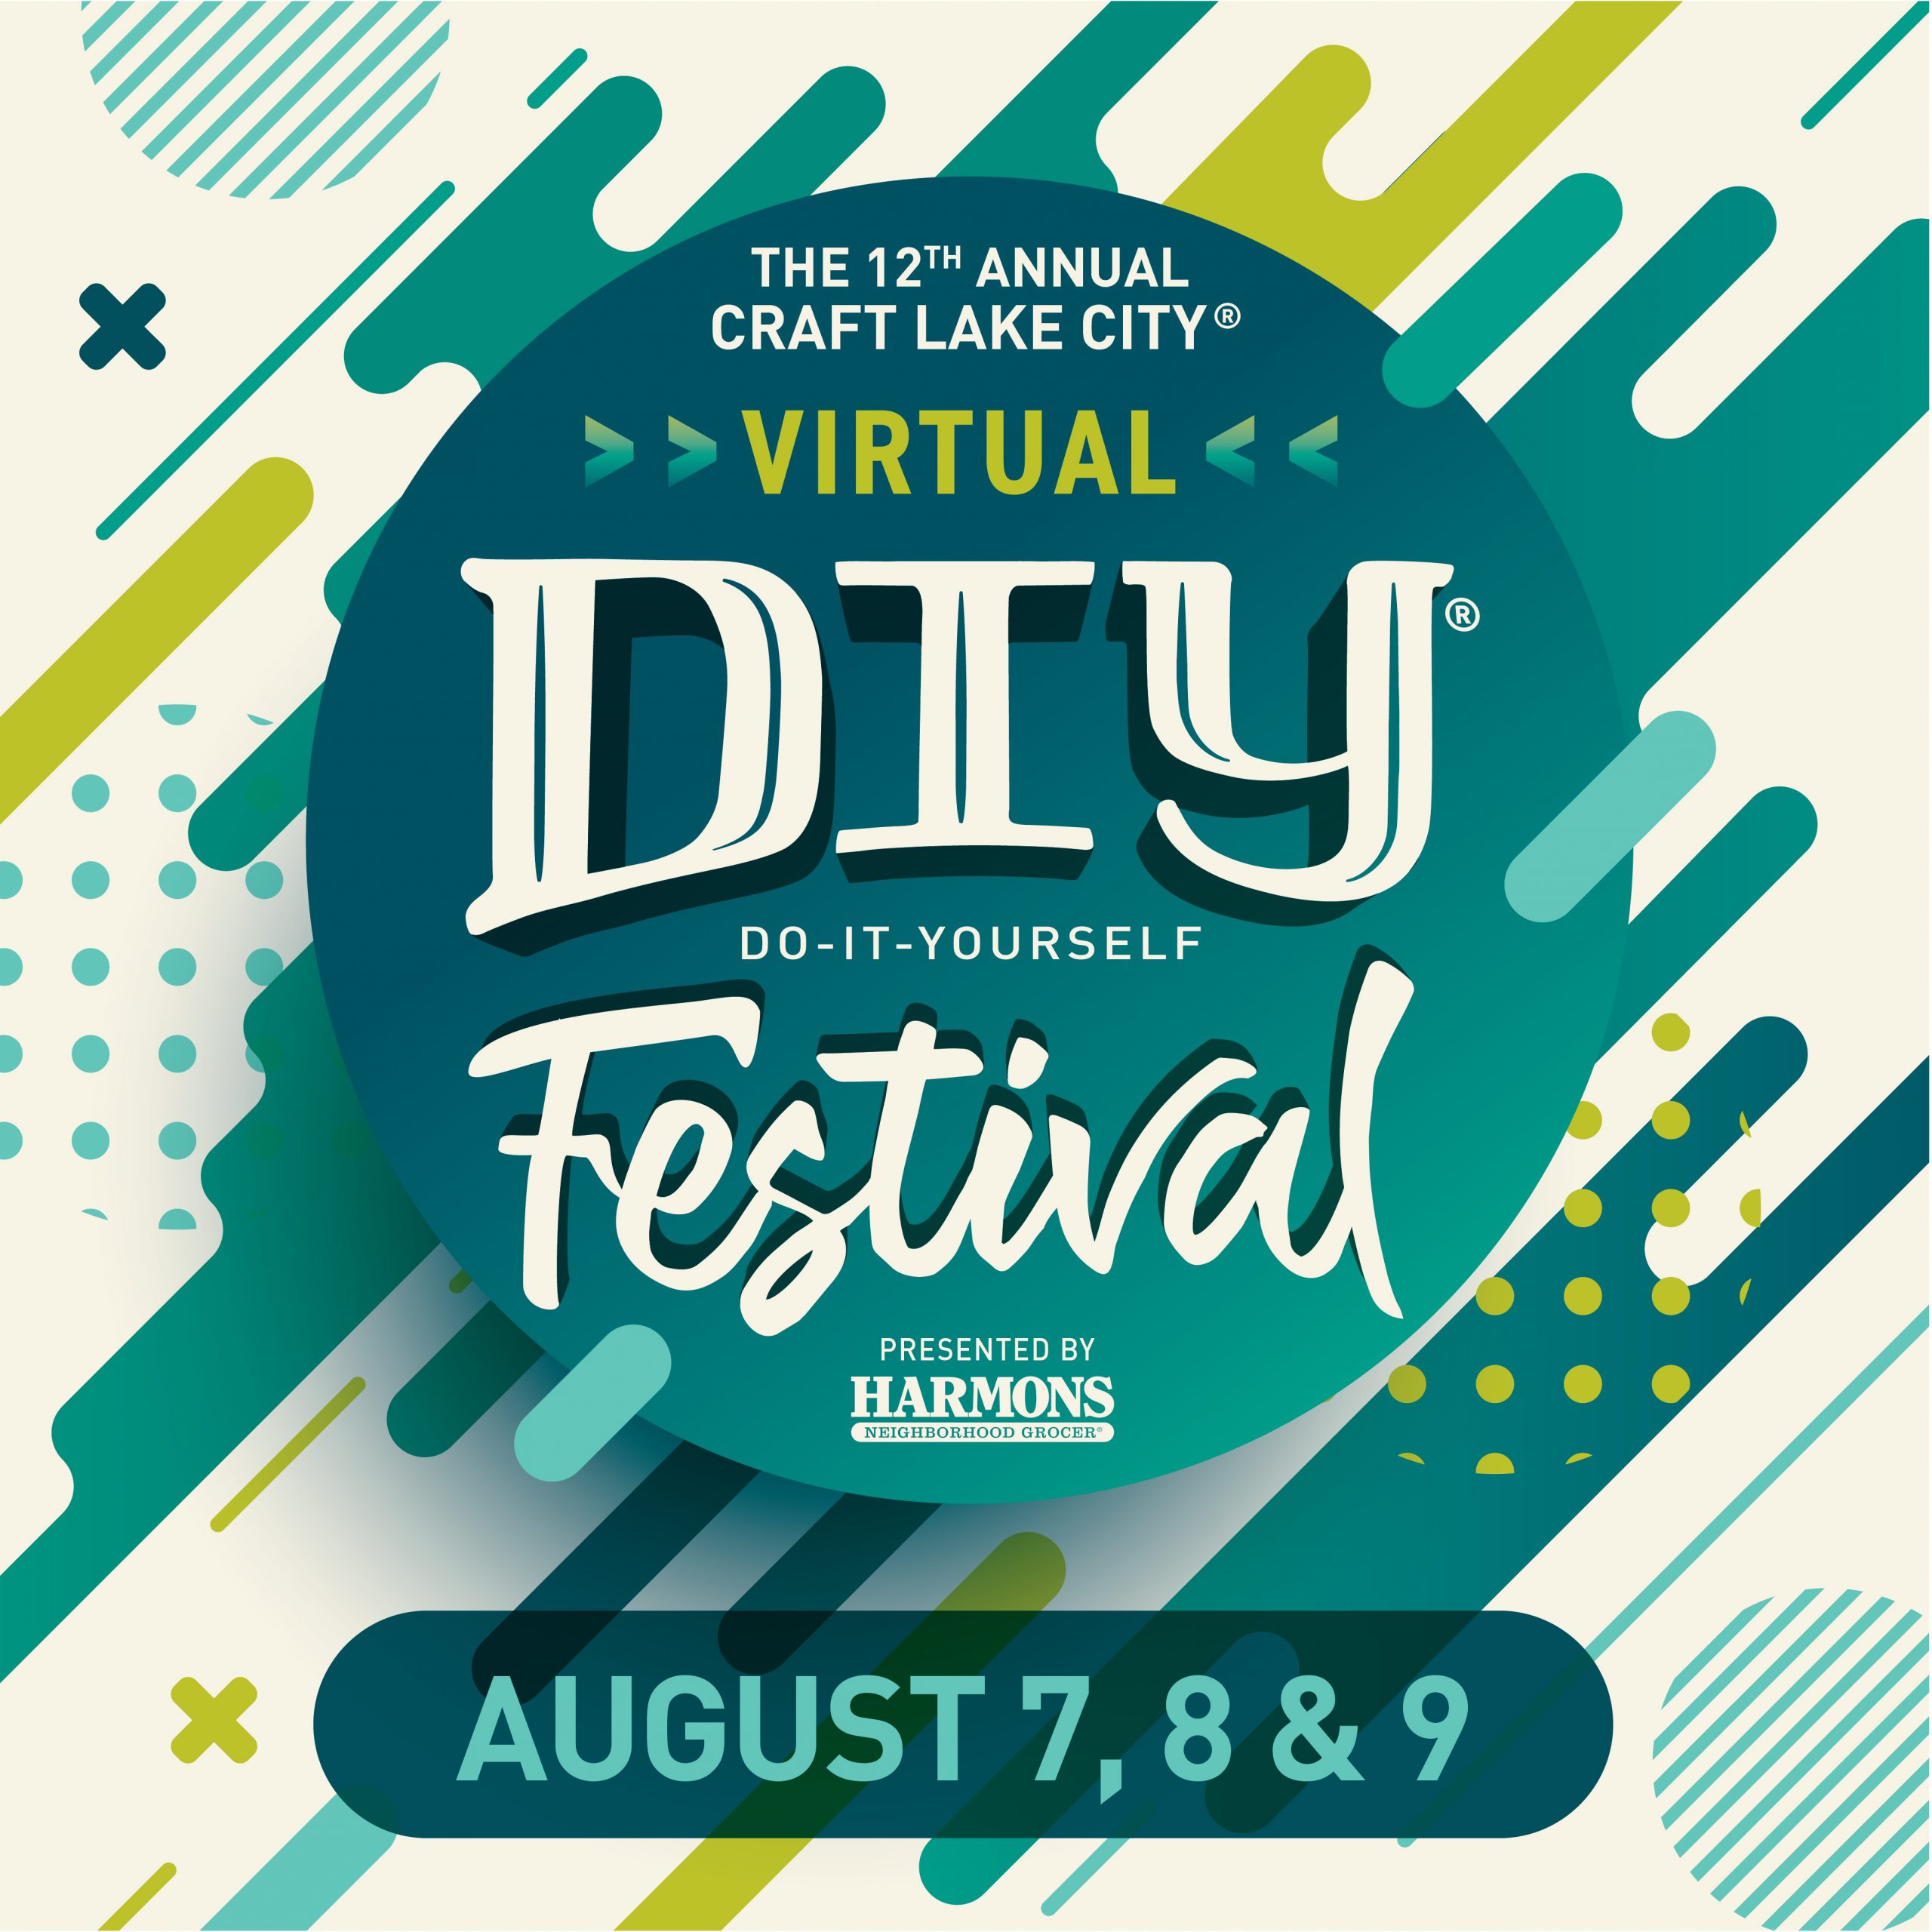 The 12th Annual Craft Lake City® DIY Festival® Presented By Harmons Is Going Virtual